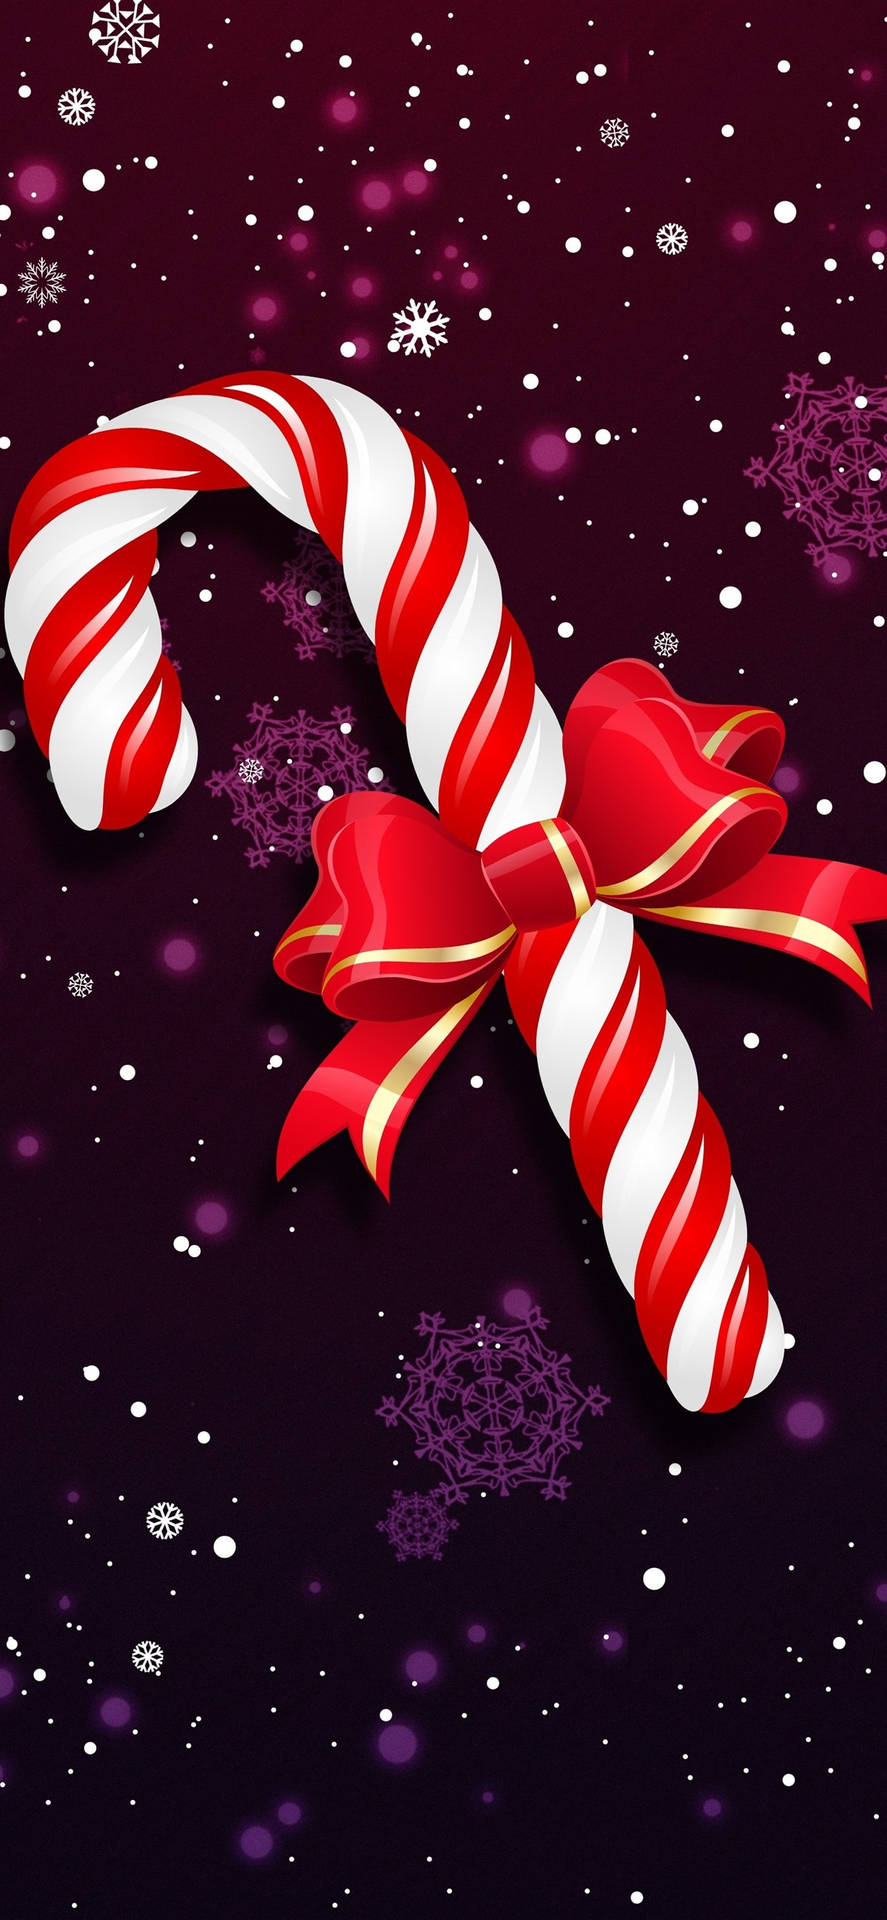 Candy Cane With Ribbon Wallpaper